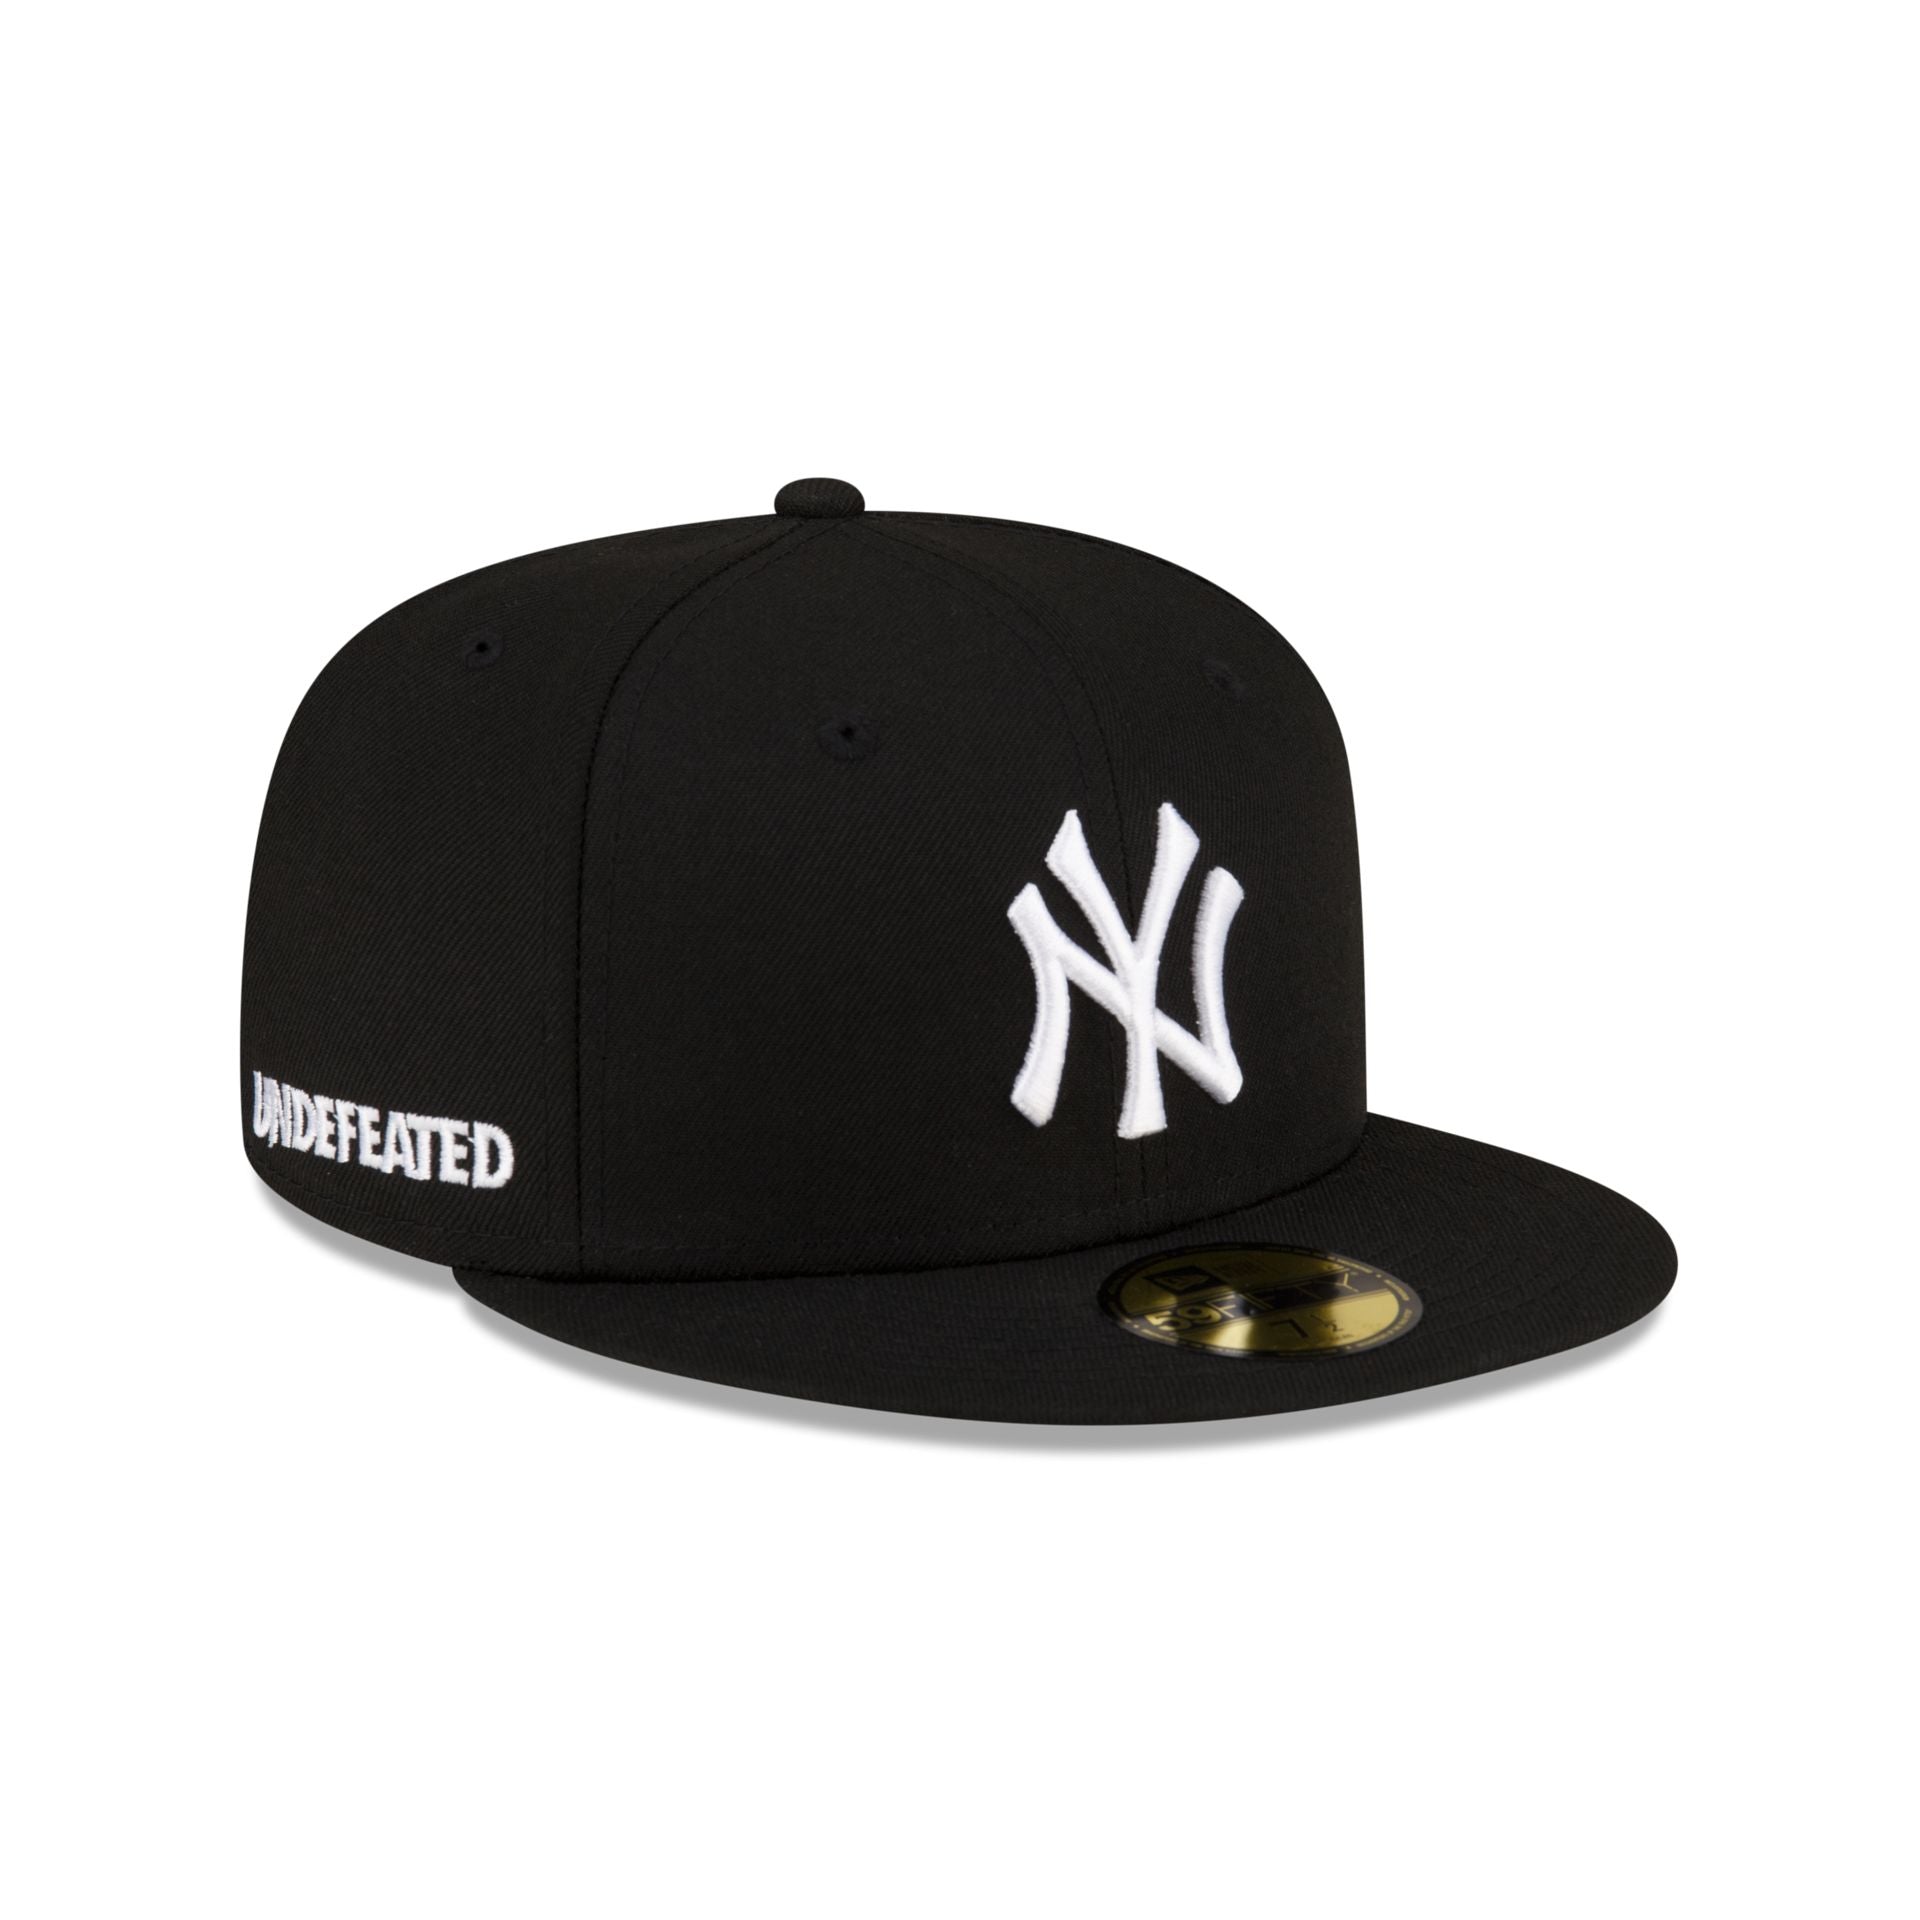 UNDEFEATED x NEWERA GRADIENT ICONFITTTED